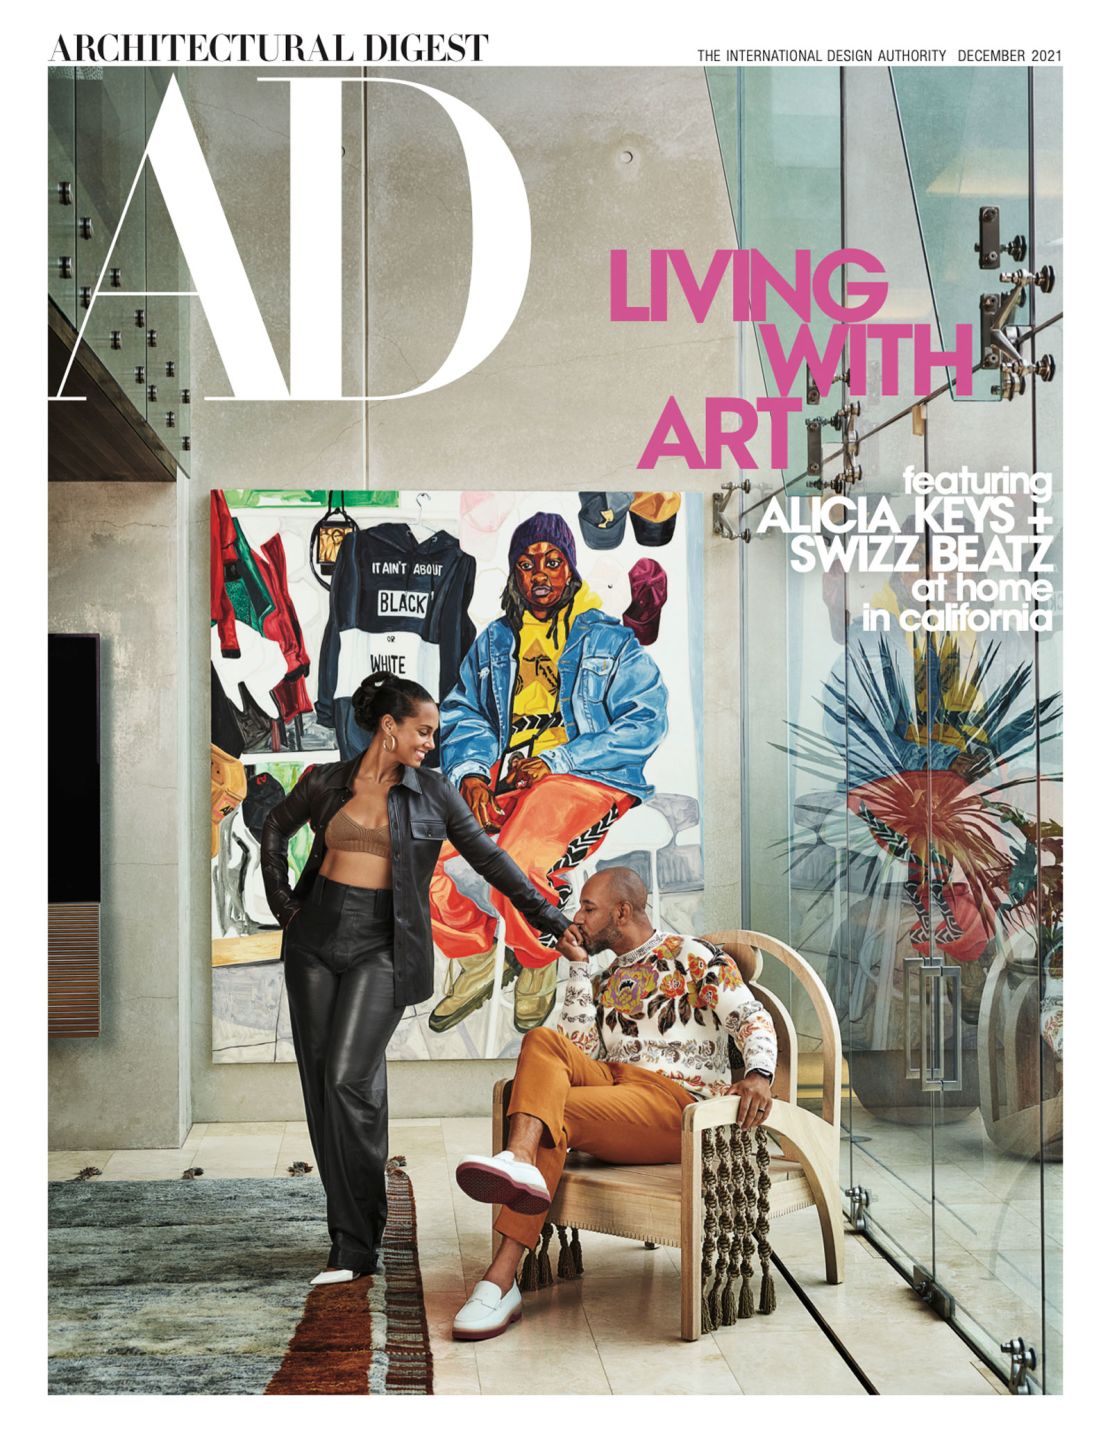 The December issue of Architectural Digest, which features Hugh Jackman and Deborra-Lee Furness' home alongside a cover story on Alicia Keys and Swizz Beatz's California mansion.